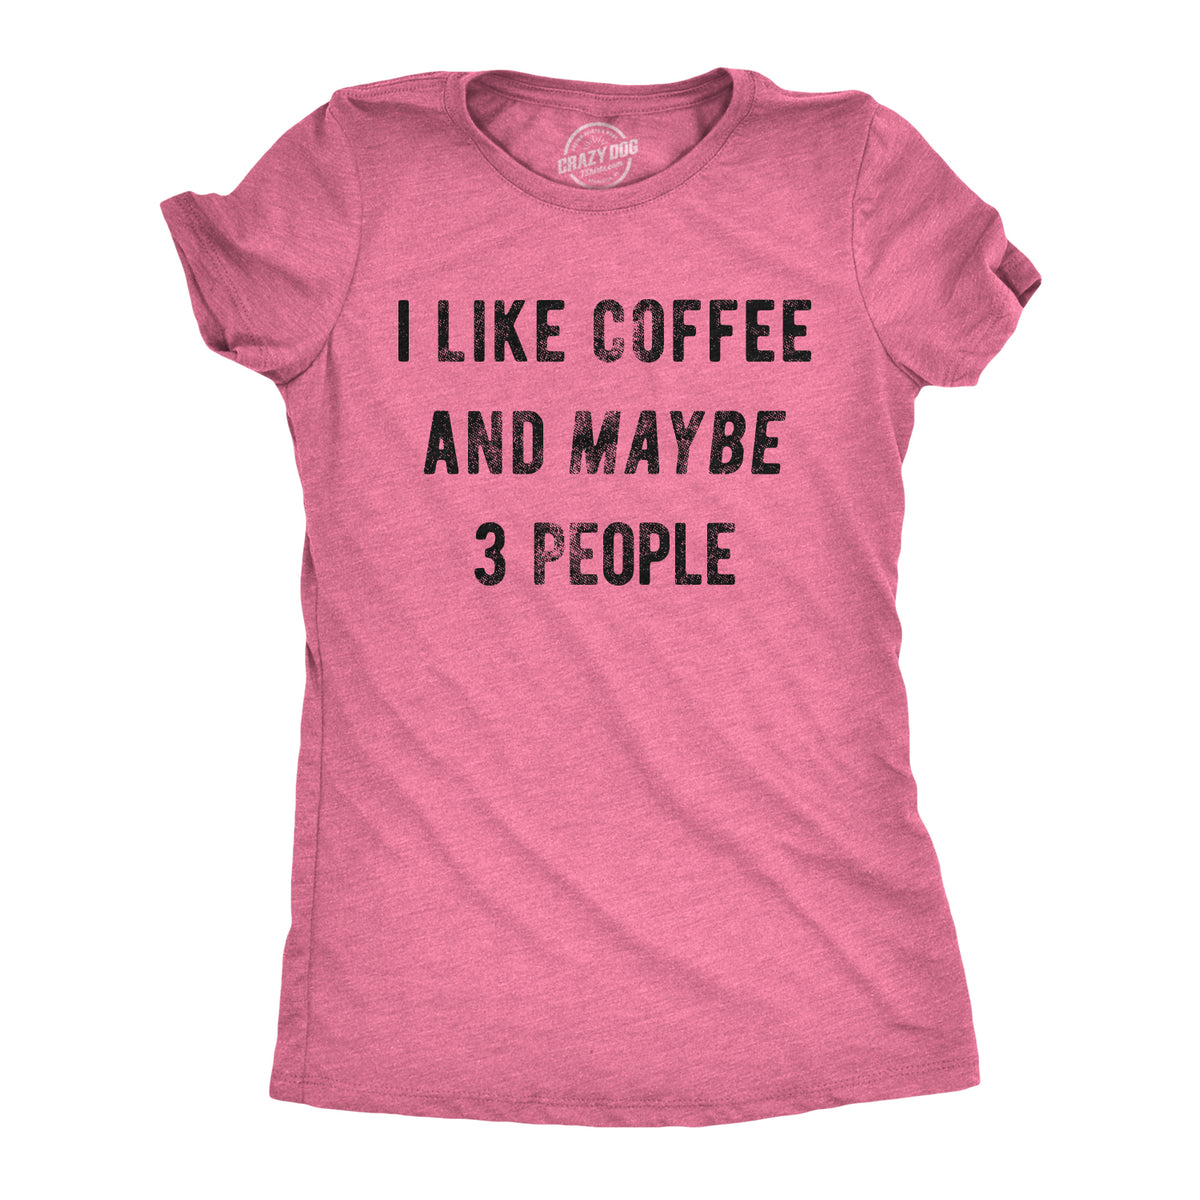 Funny Pink I Like Coffee And Maybe 3 People Womens T Shirt Nerdy Coffee Introvert Tee